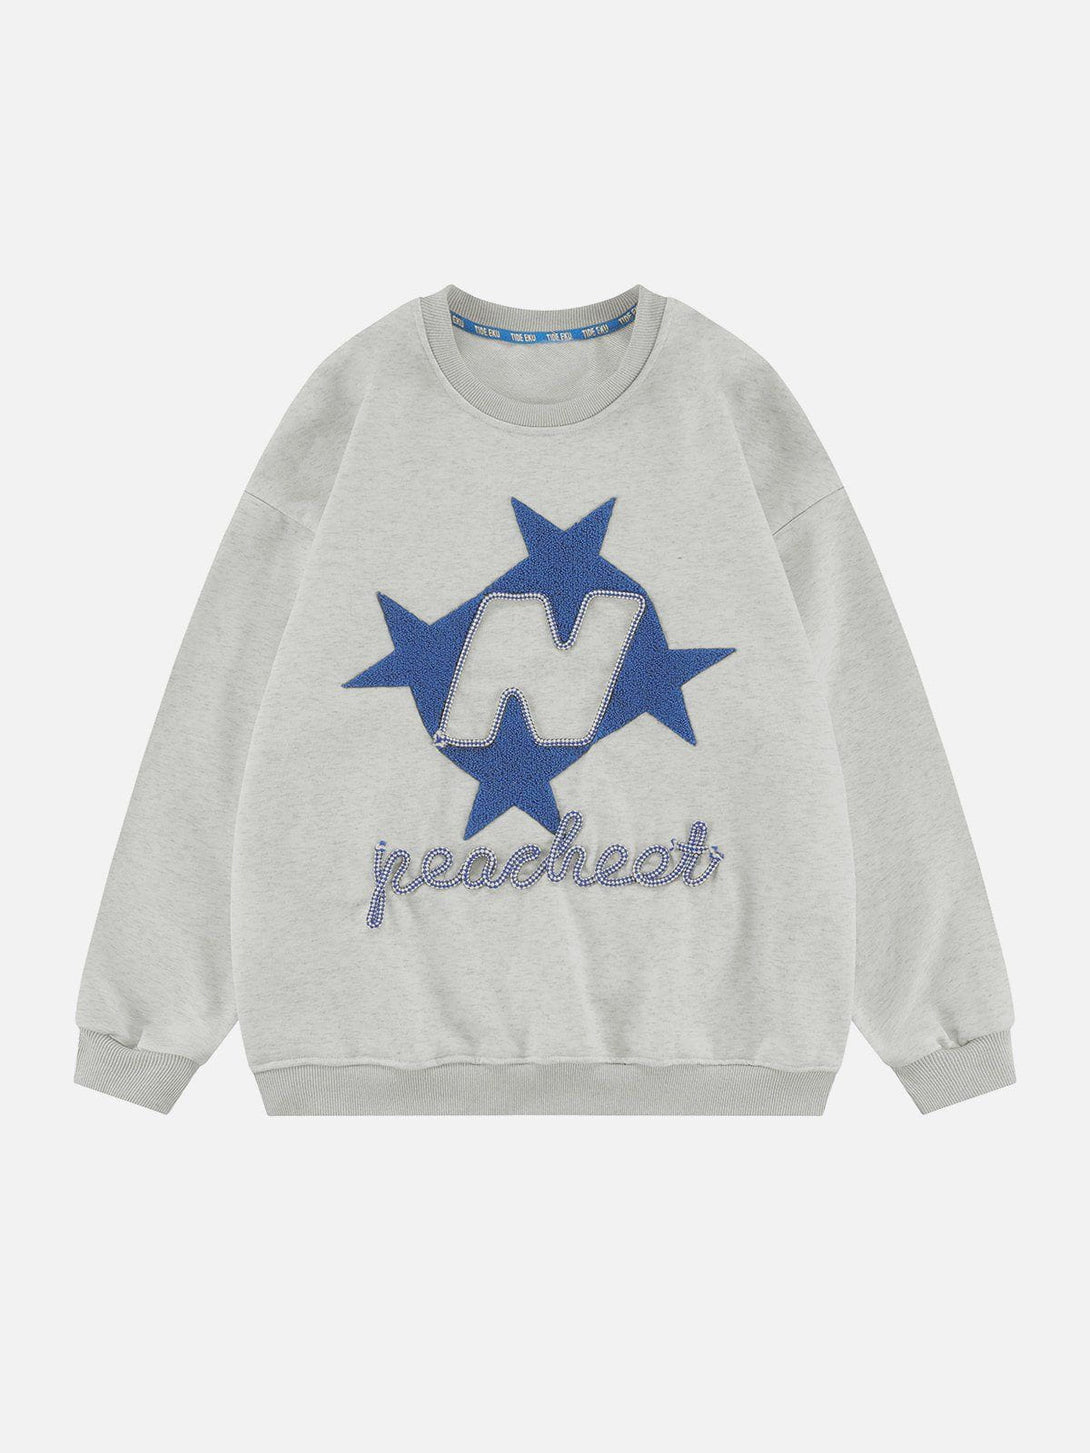 Majesda® - Star Terry Embroidered Sweatshirt outfit ideas streetwear fashion